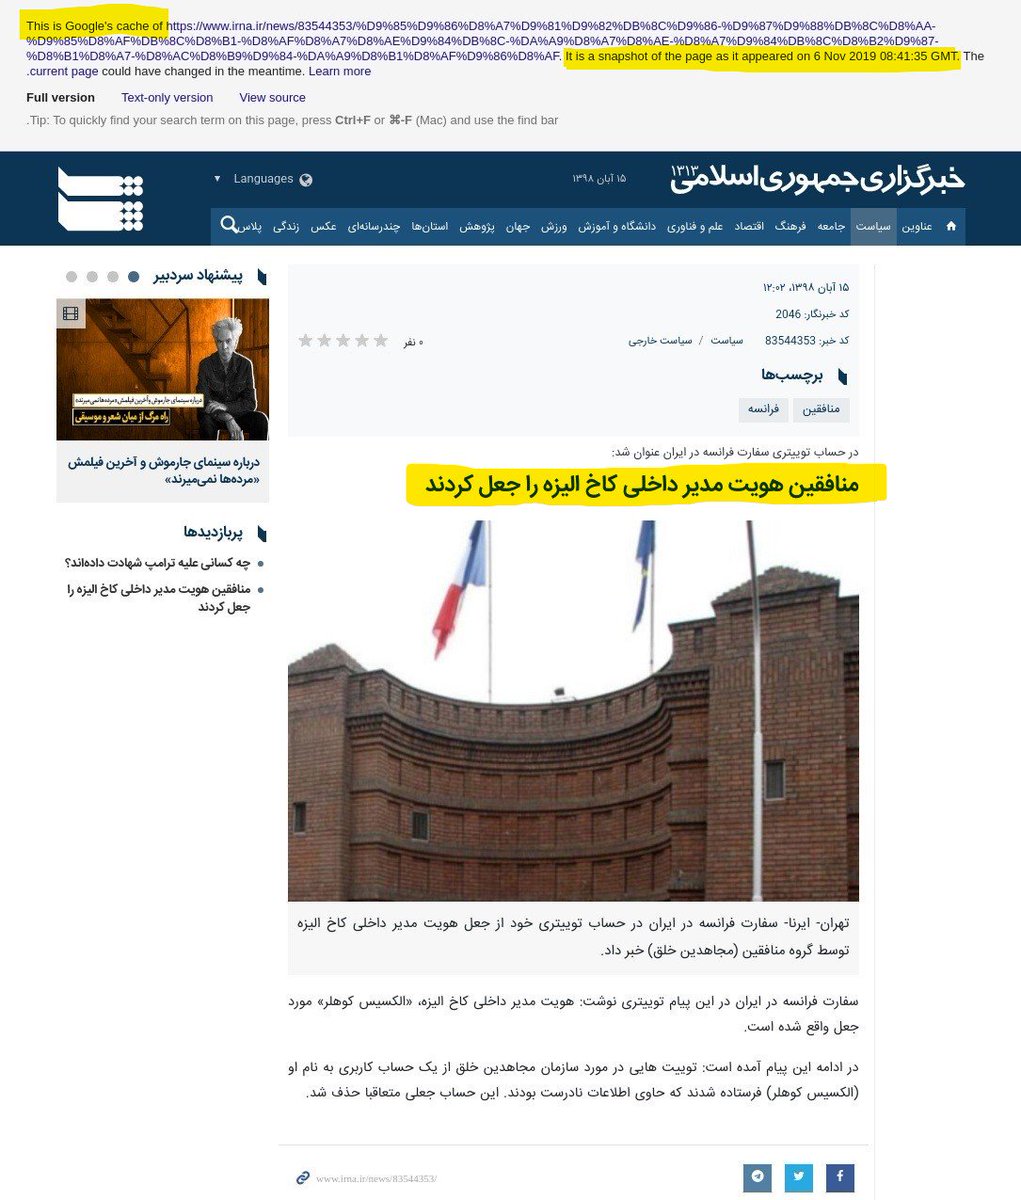 Those running Iran's disinfo campaign are plain stupid. The official IRNA news agency ran a piece falsely quoting  @FranceenIran as saying the MEK set up the fake  @Alexis_Kohler_ account. (See pic for FR's true position) Updated version deleted the claim but forgot Google's cache!